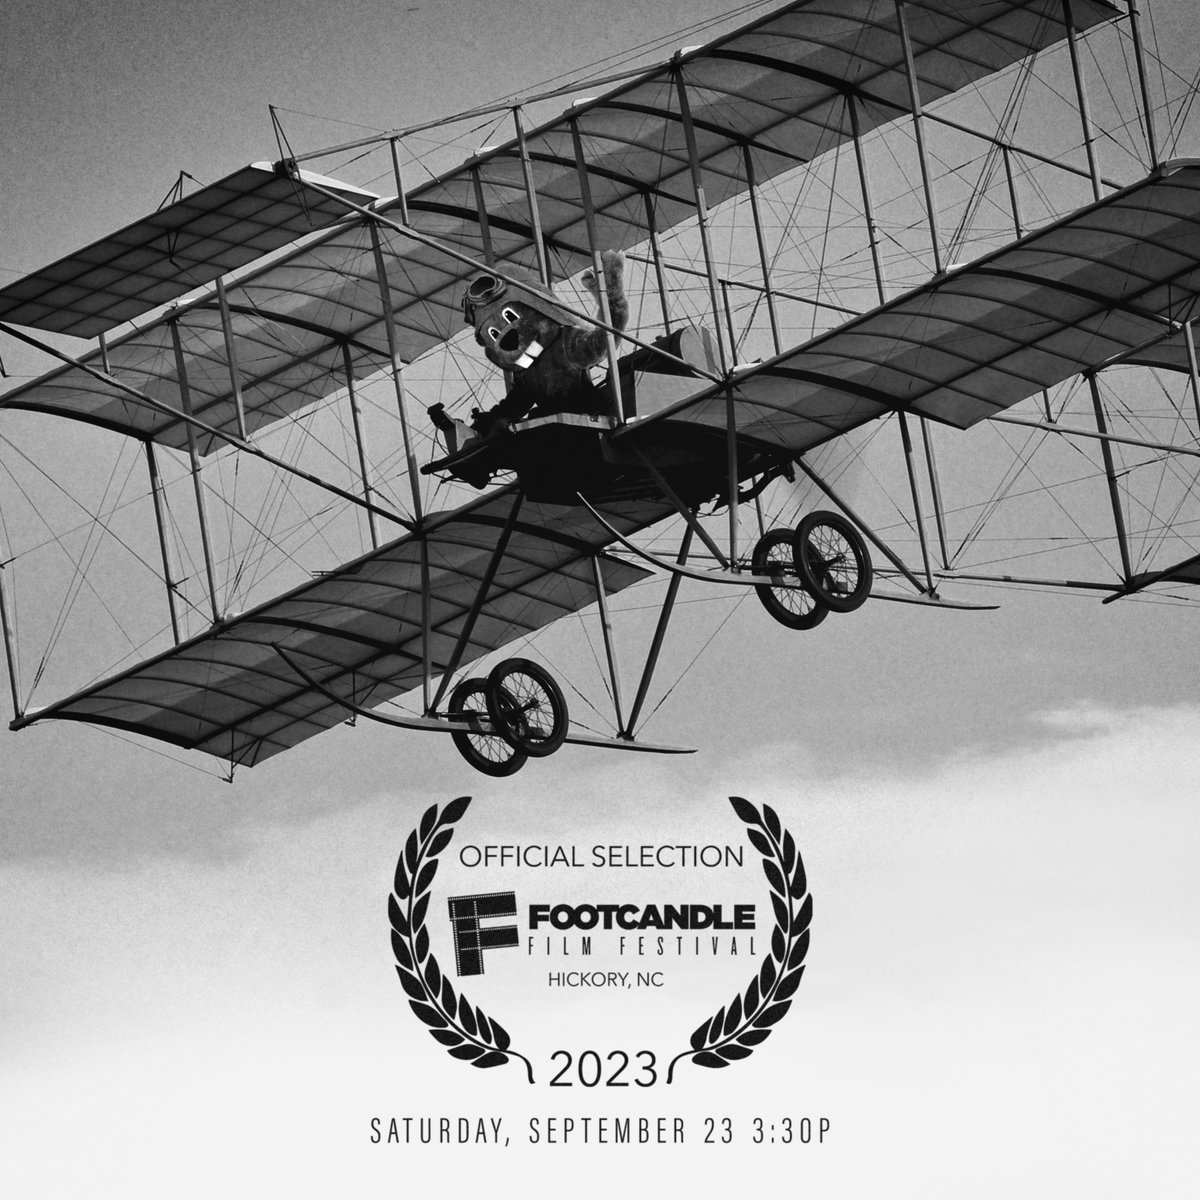 the wright brothers walked so hundreds of beavers could soar. we'll see you soon @footcandlefilm 

#HundredsOfBeaversMovie #FootcandleFilmFest #WrightBrothers #AviationMuseum #Airplane #Flying #Incoming #FilmFest #FIlmFestival #IndieFIlm #ComedyMovie